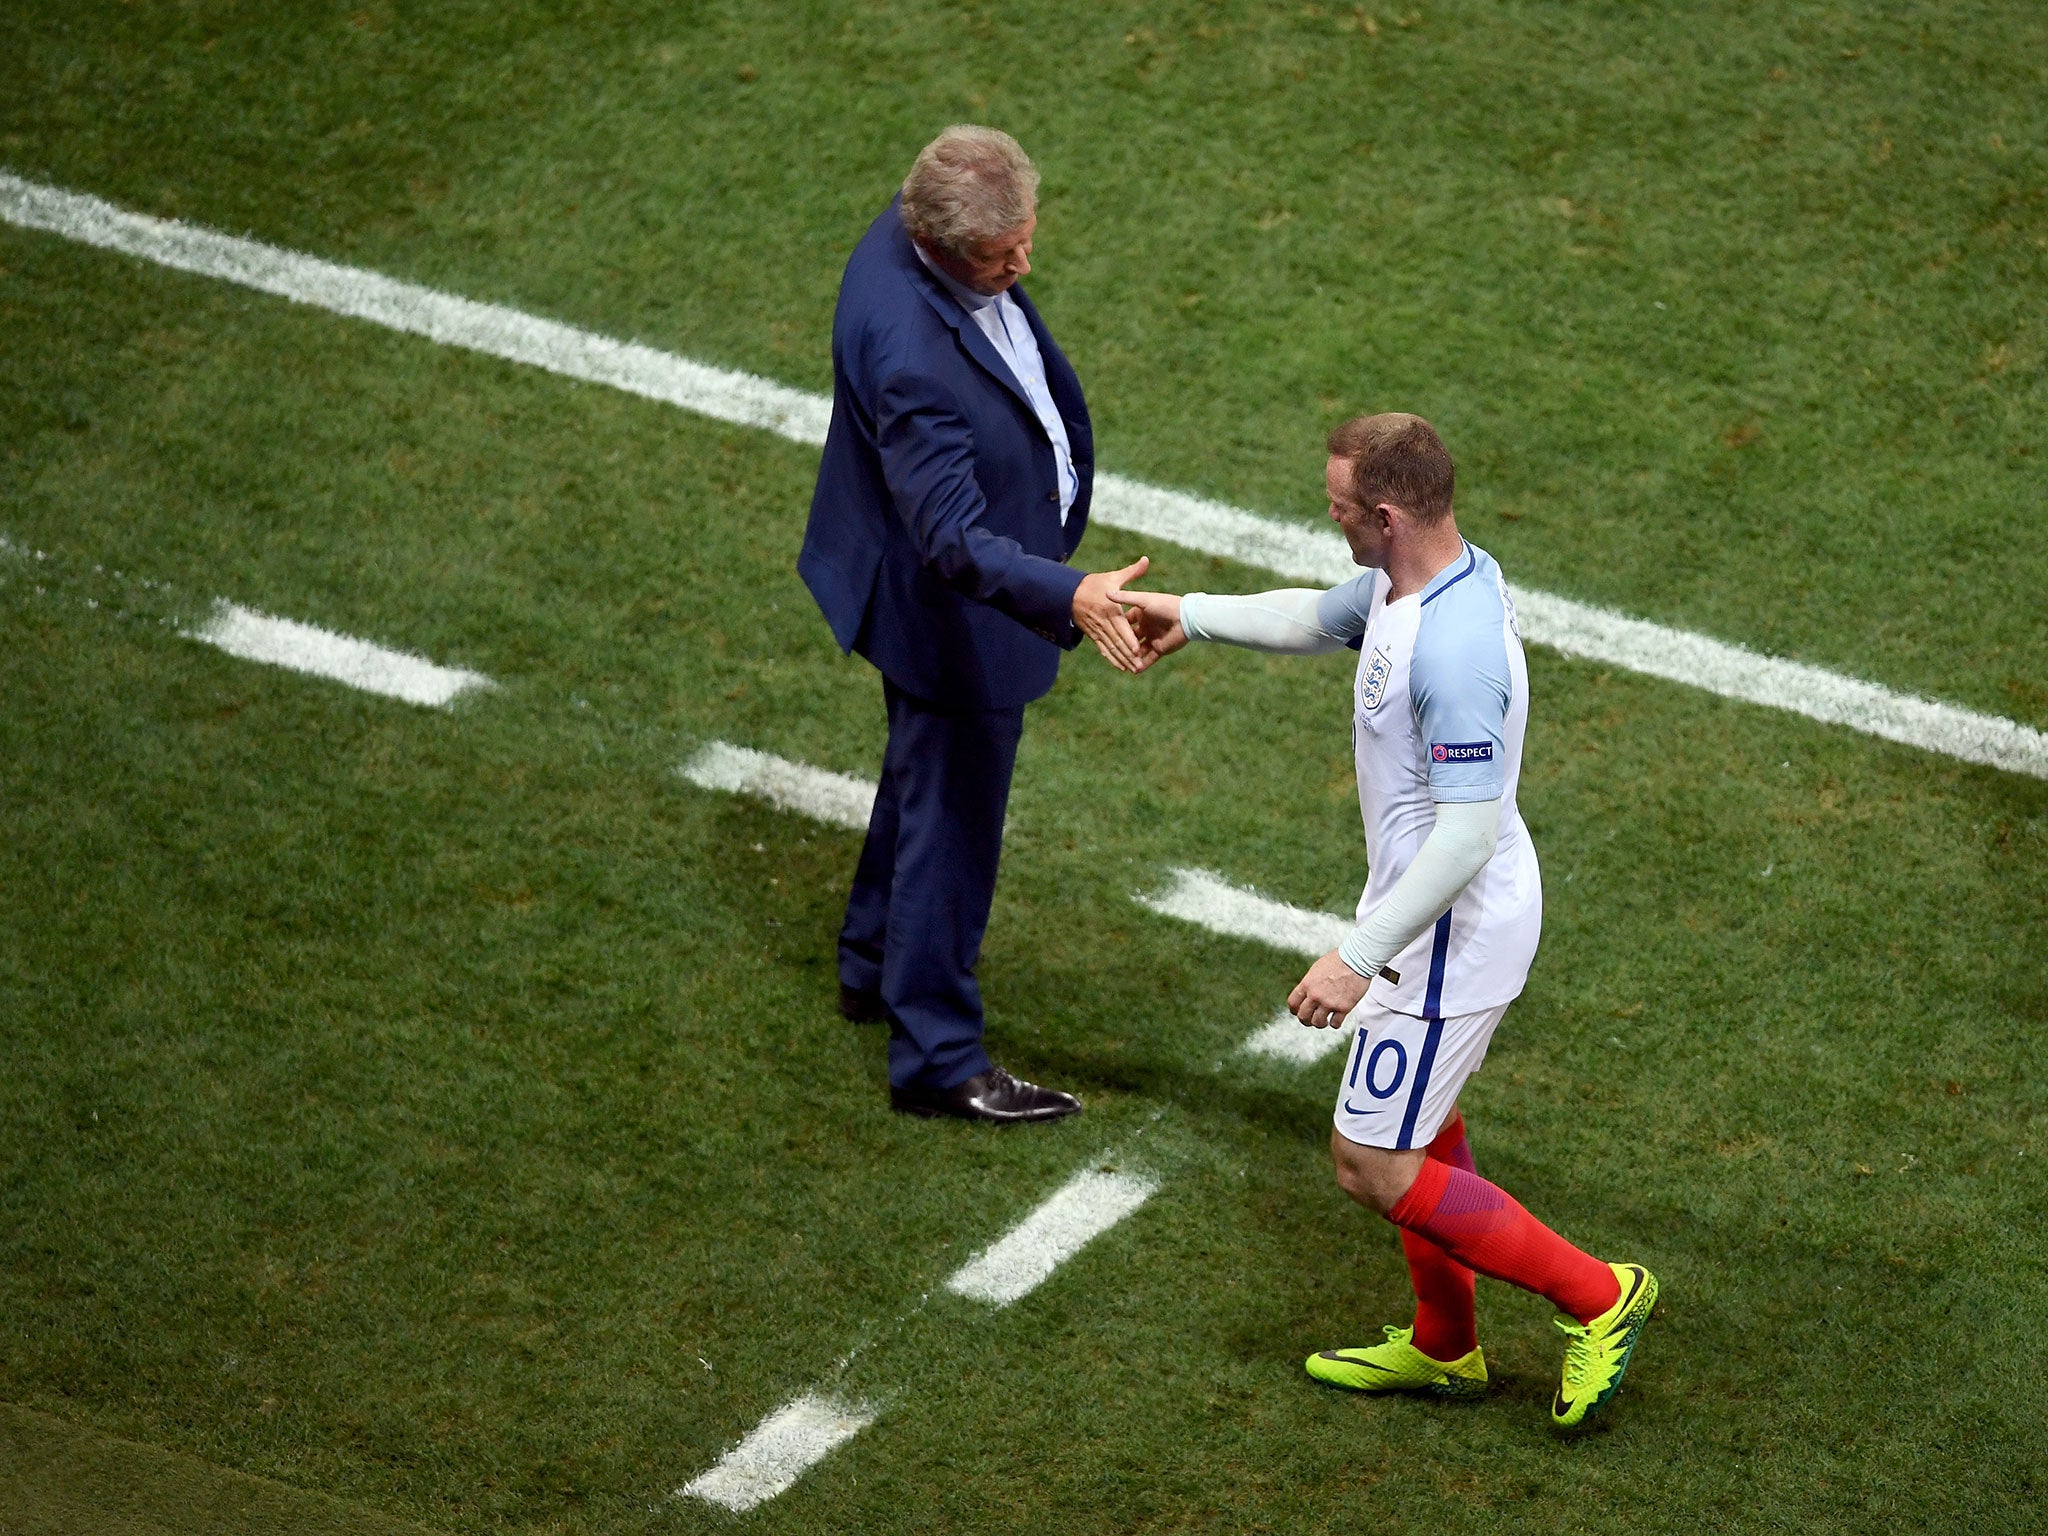 Rooney said that Hodgson had addressed the players as a group and told them he was leaving